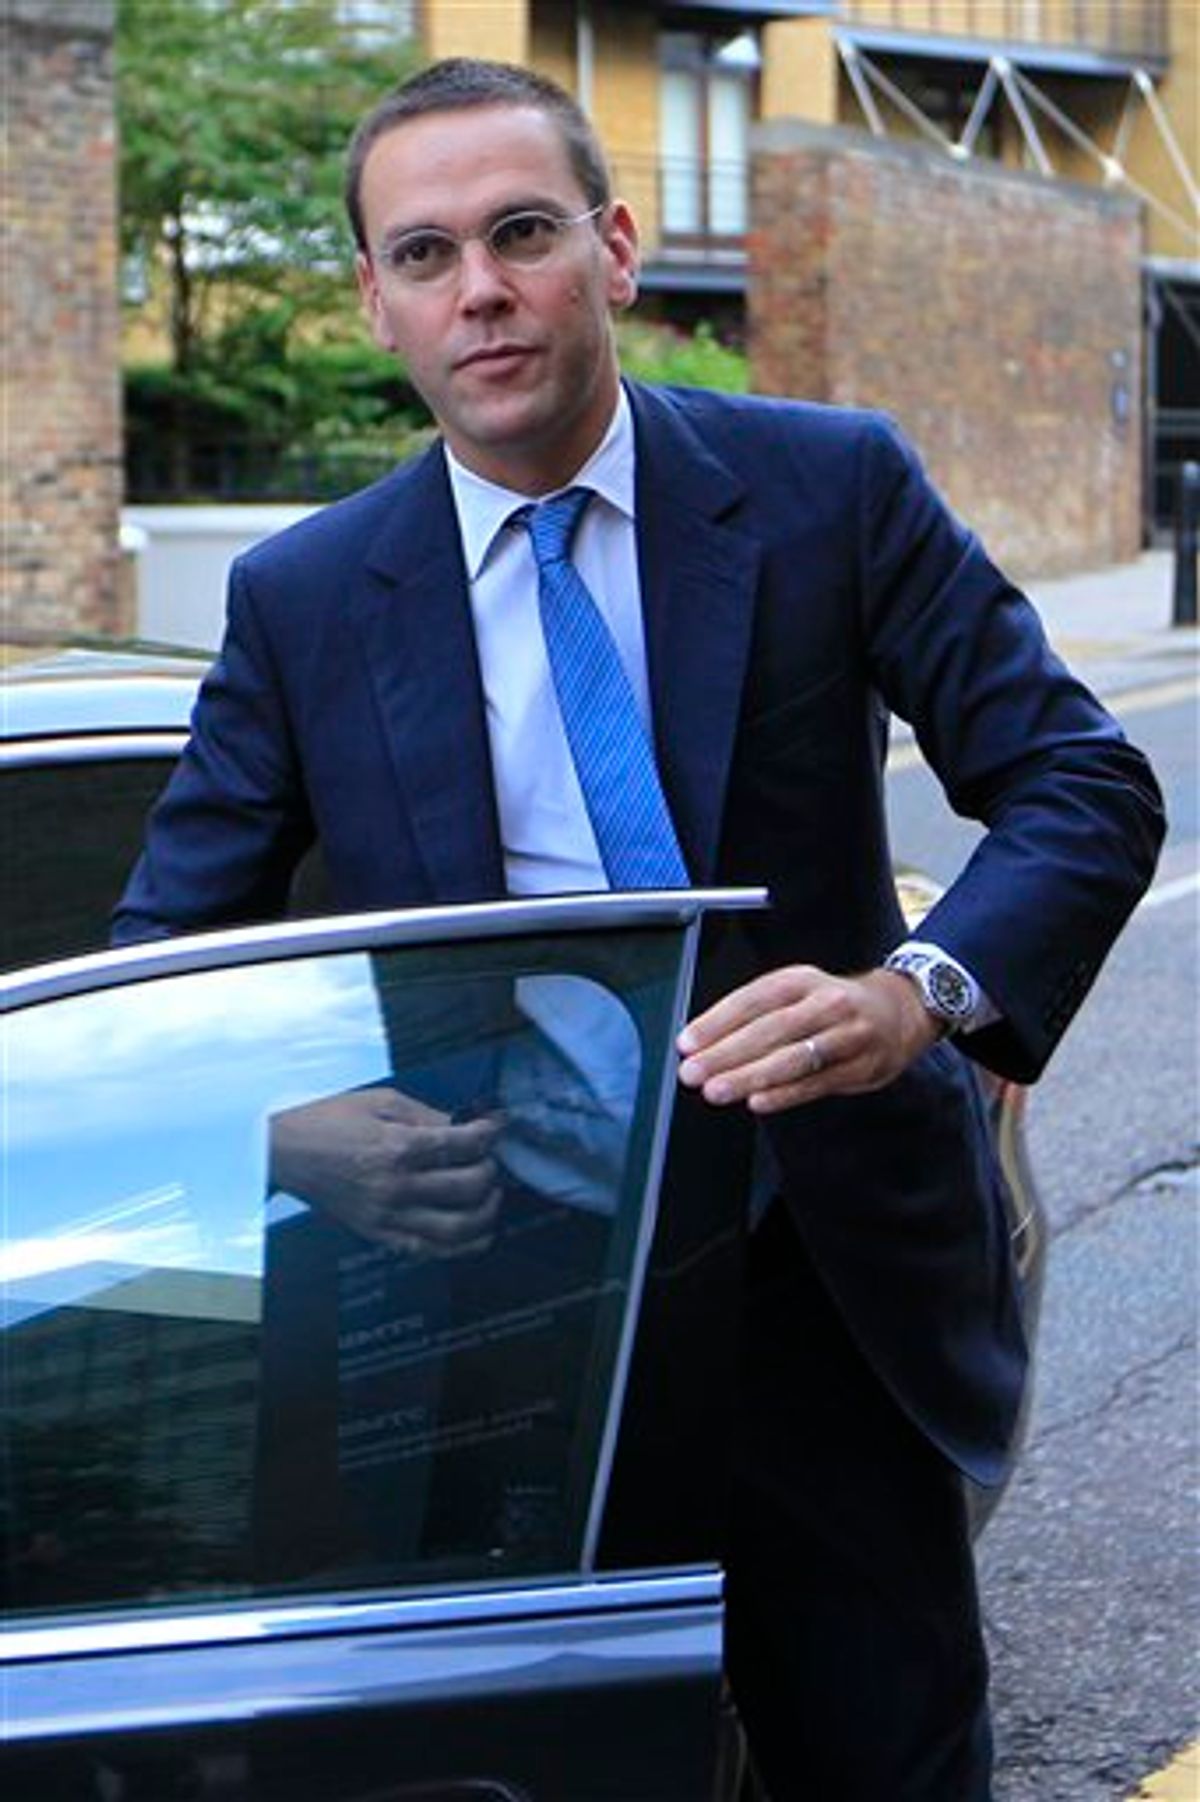 FILE - In this July 19, 2011 file photo, Chief executive of News Corporation Europe and Asia, James Murdoch, arrives at the News International headquarters in London. (AP Photo/Sang Tan, file)    (AP)